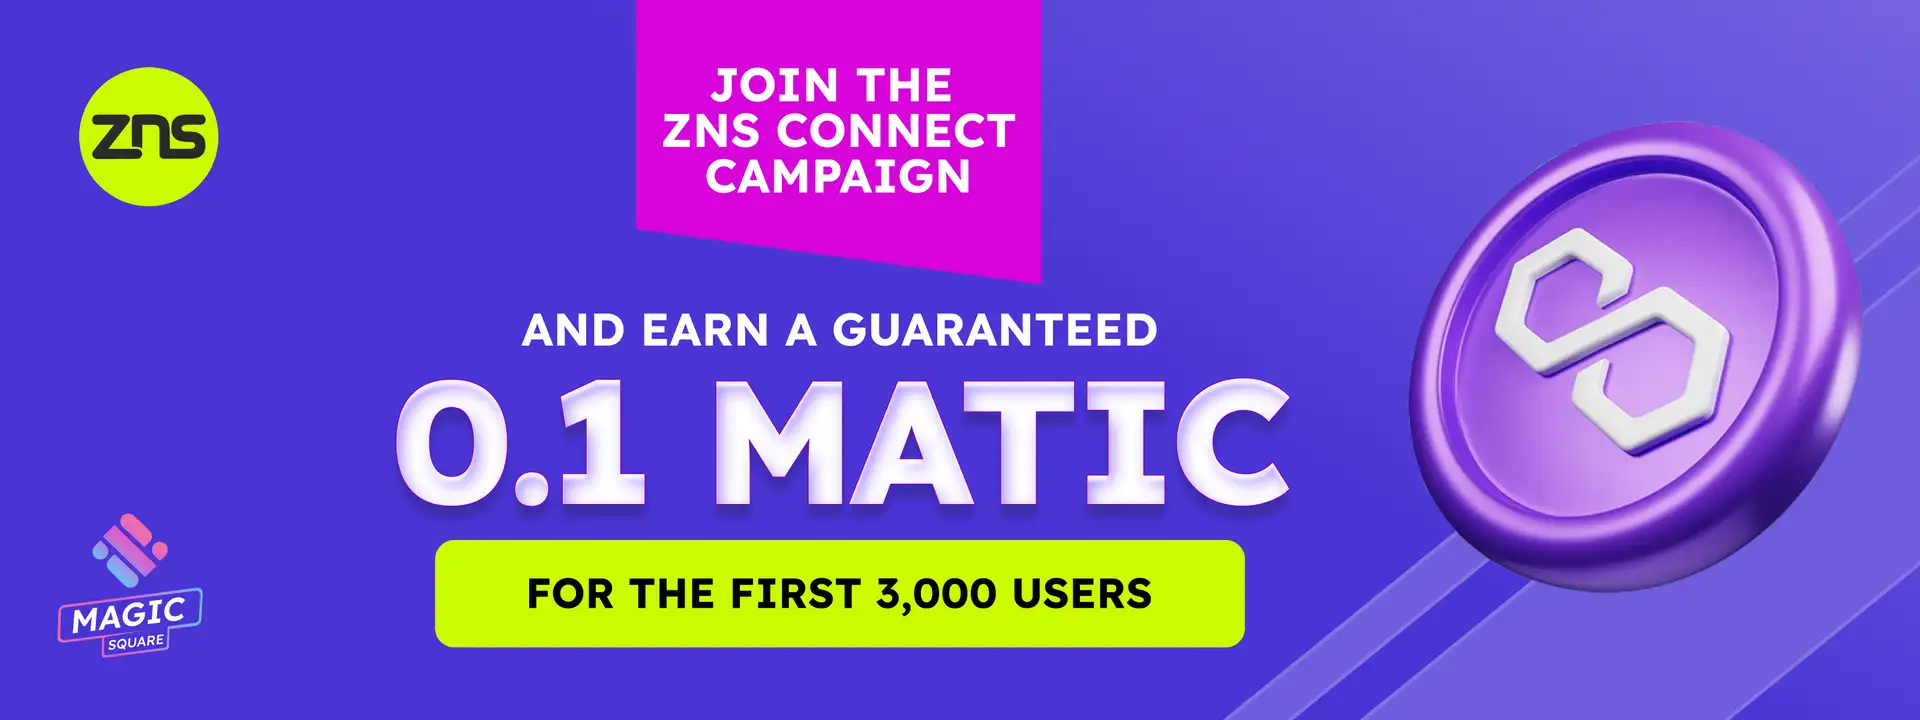 ZNS Connect - Social Magic Store Hot Offer 1